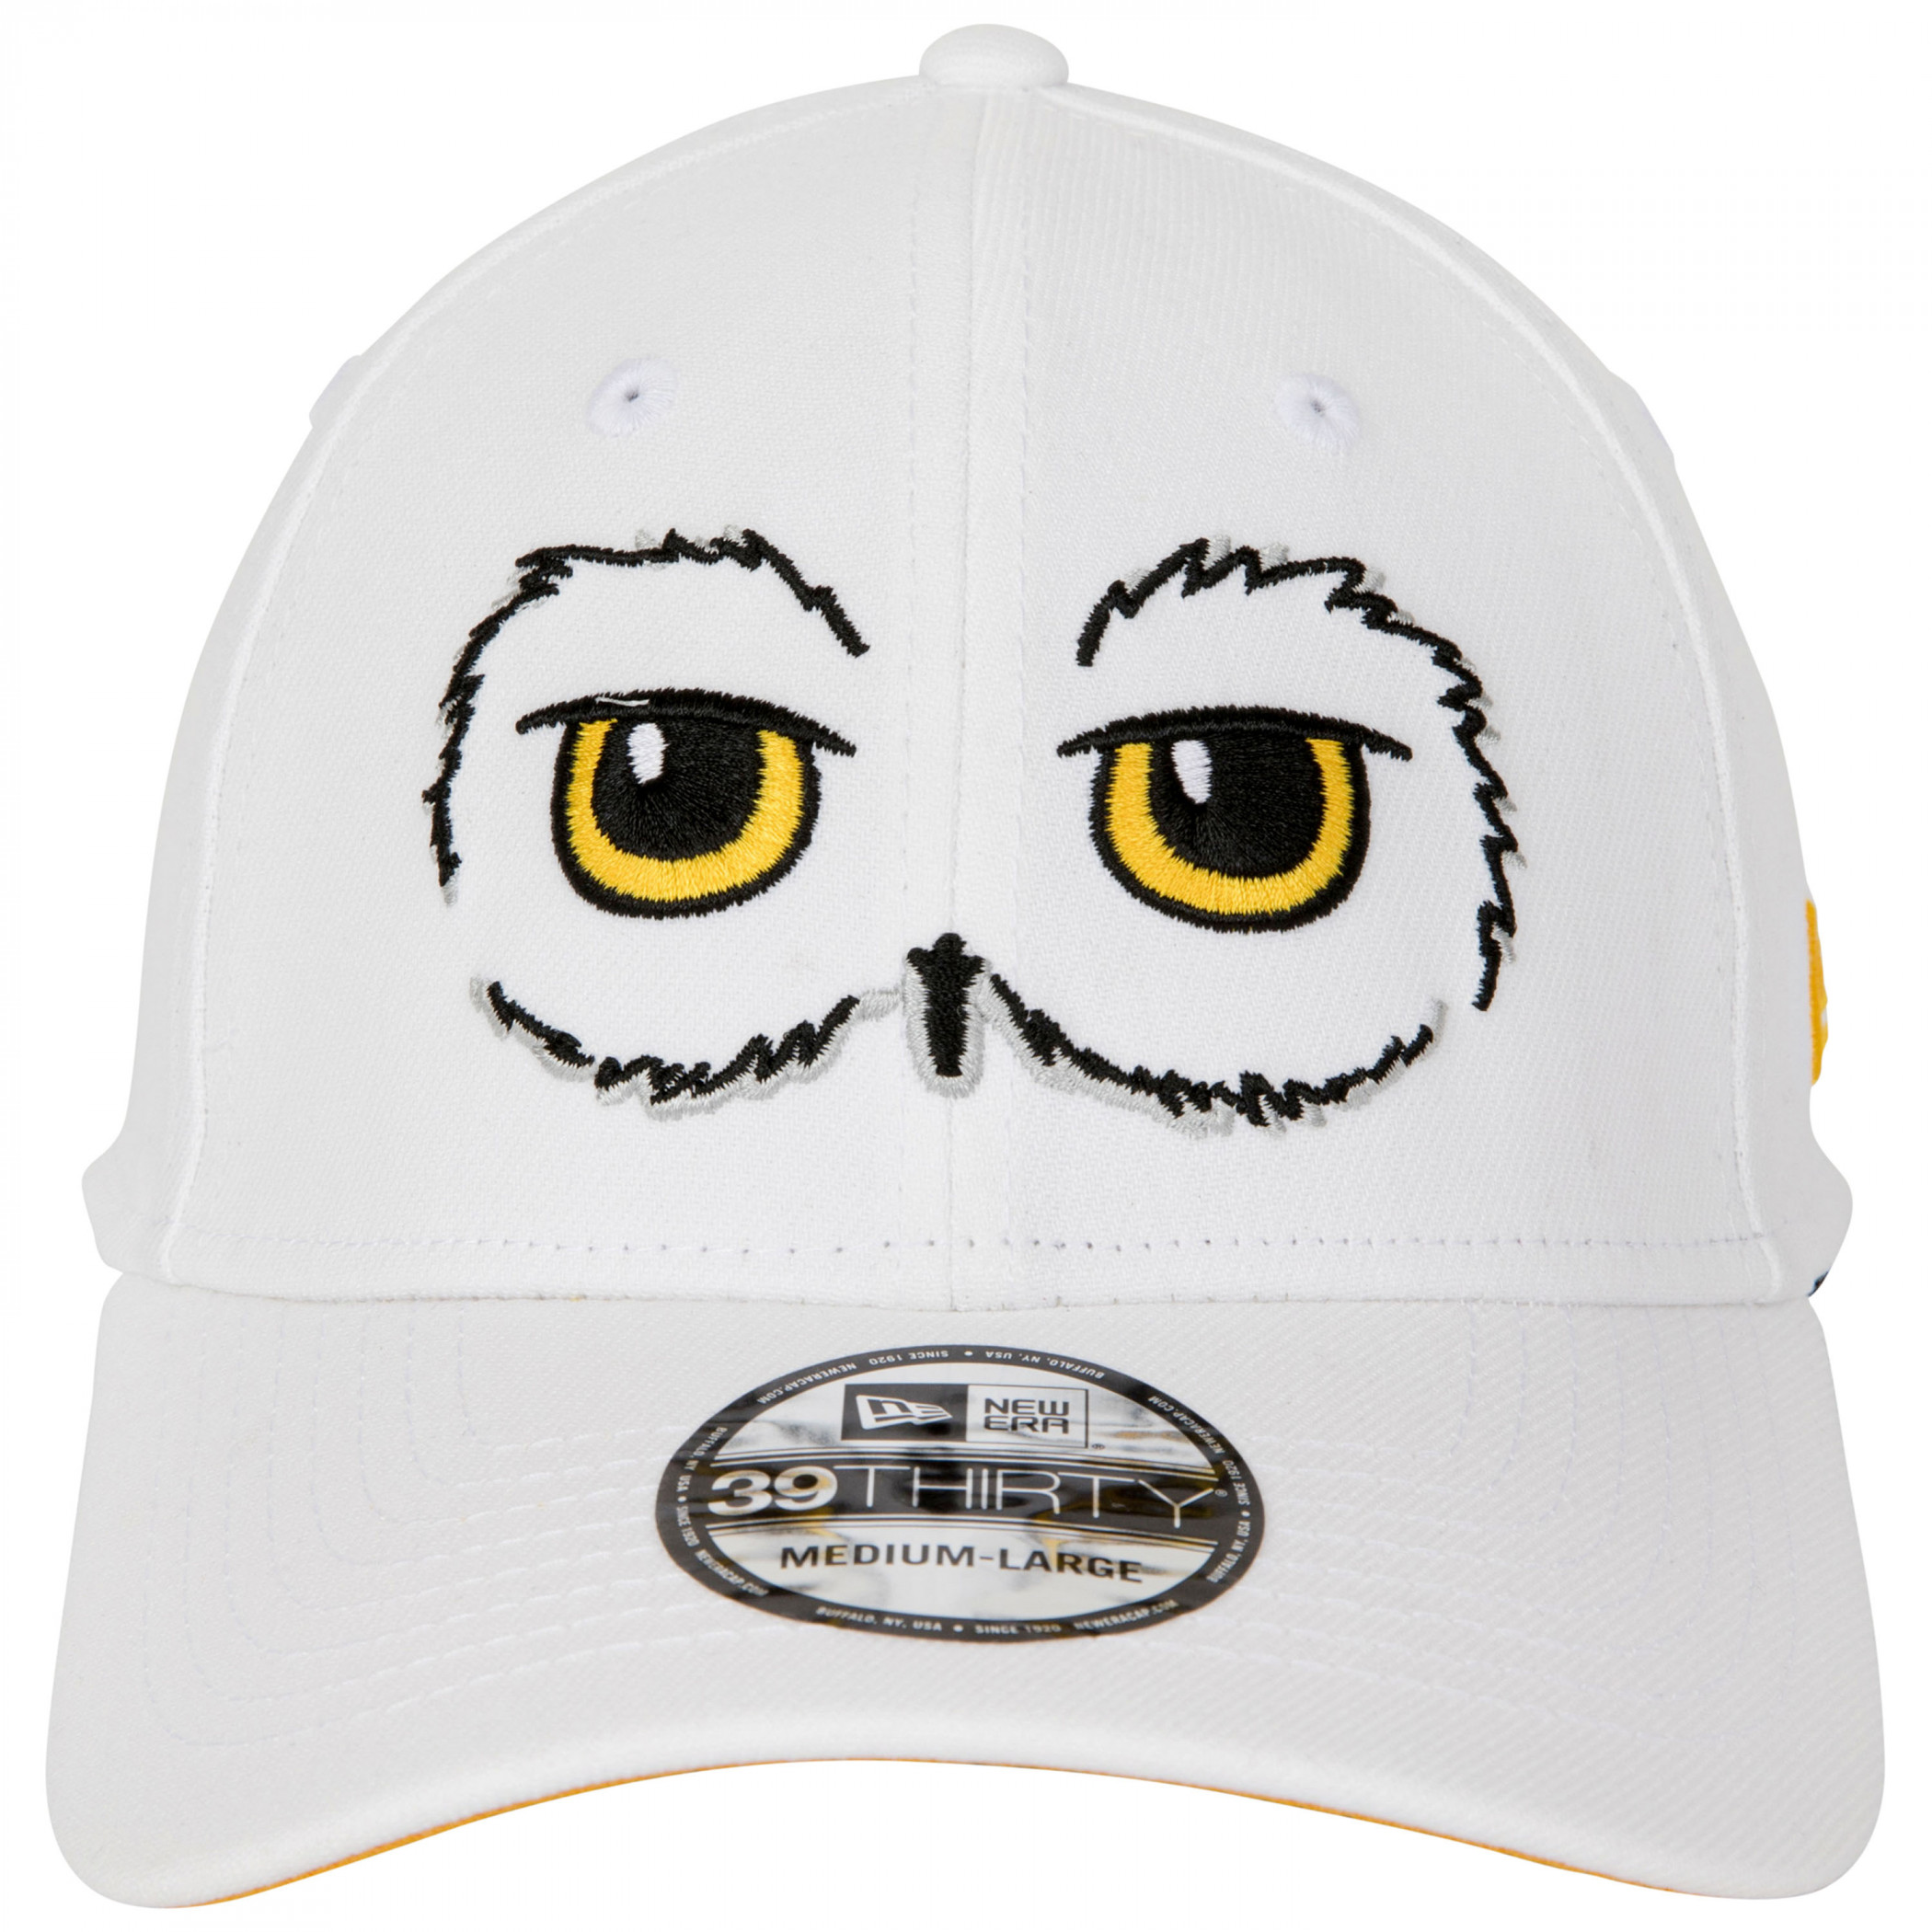 Harry Potter Hedwig Eyes New Era 39Thirty Fitted Hat